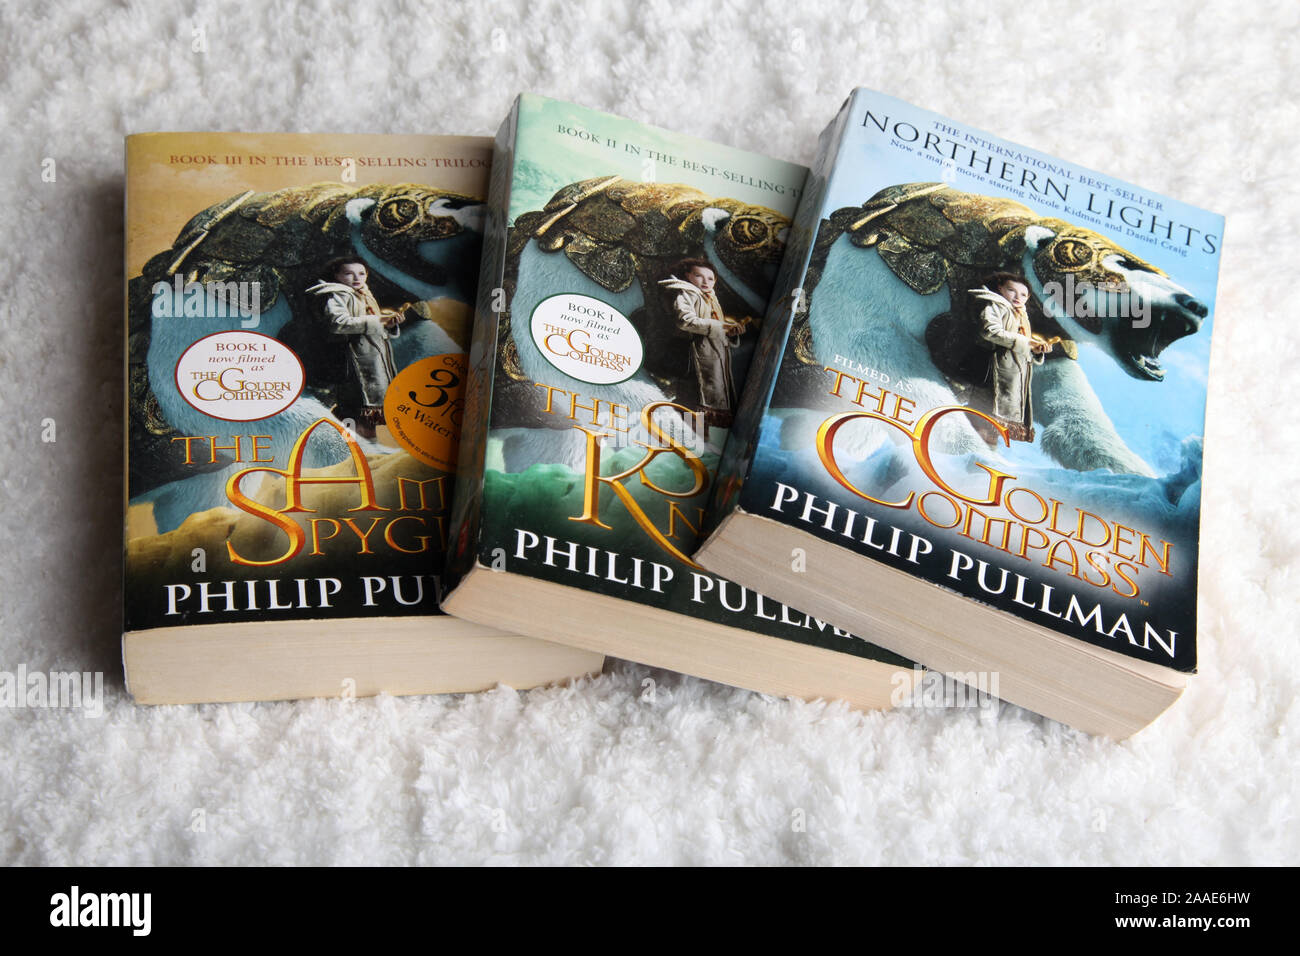 Philip Pullman His Dark Materials Paperbook Book stack on white Stock Photo